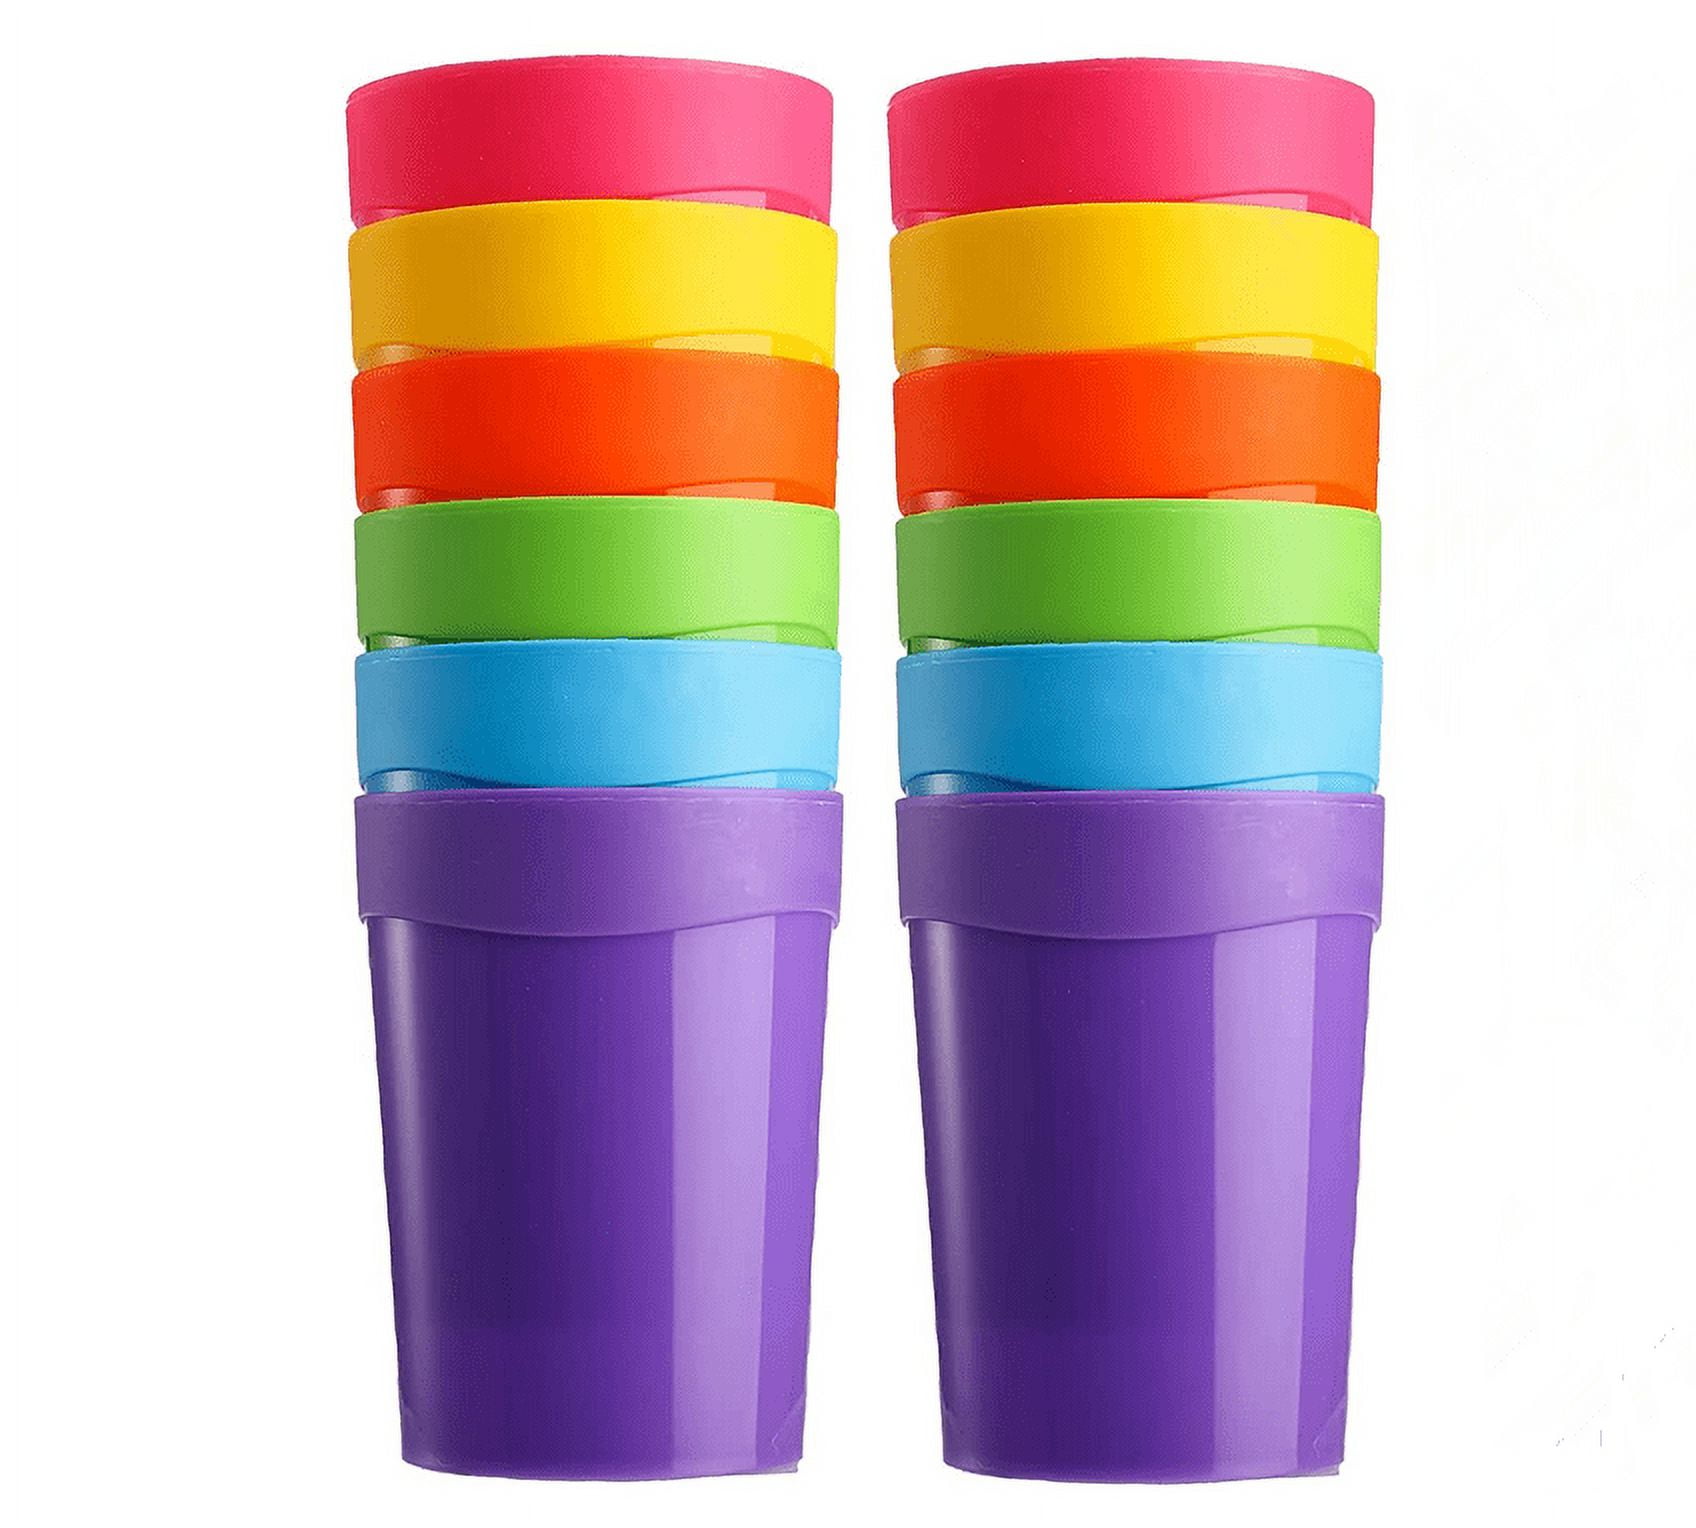  Toddmomy 6 pcs plastic drinking cups plastic water